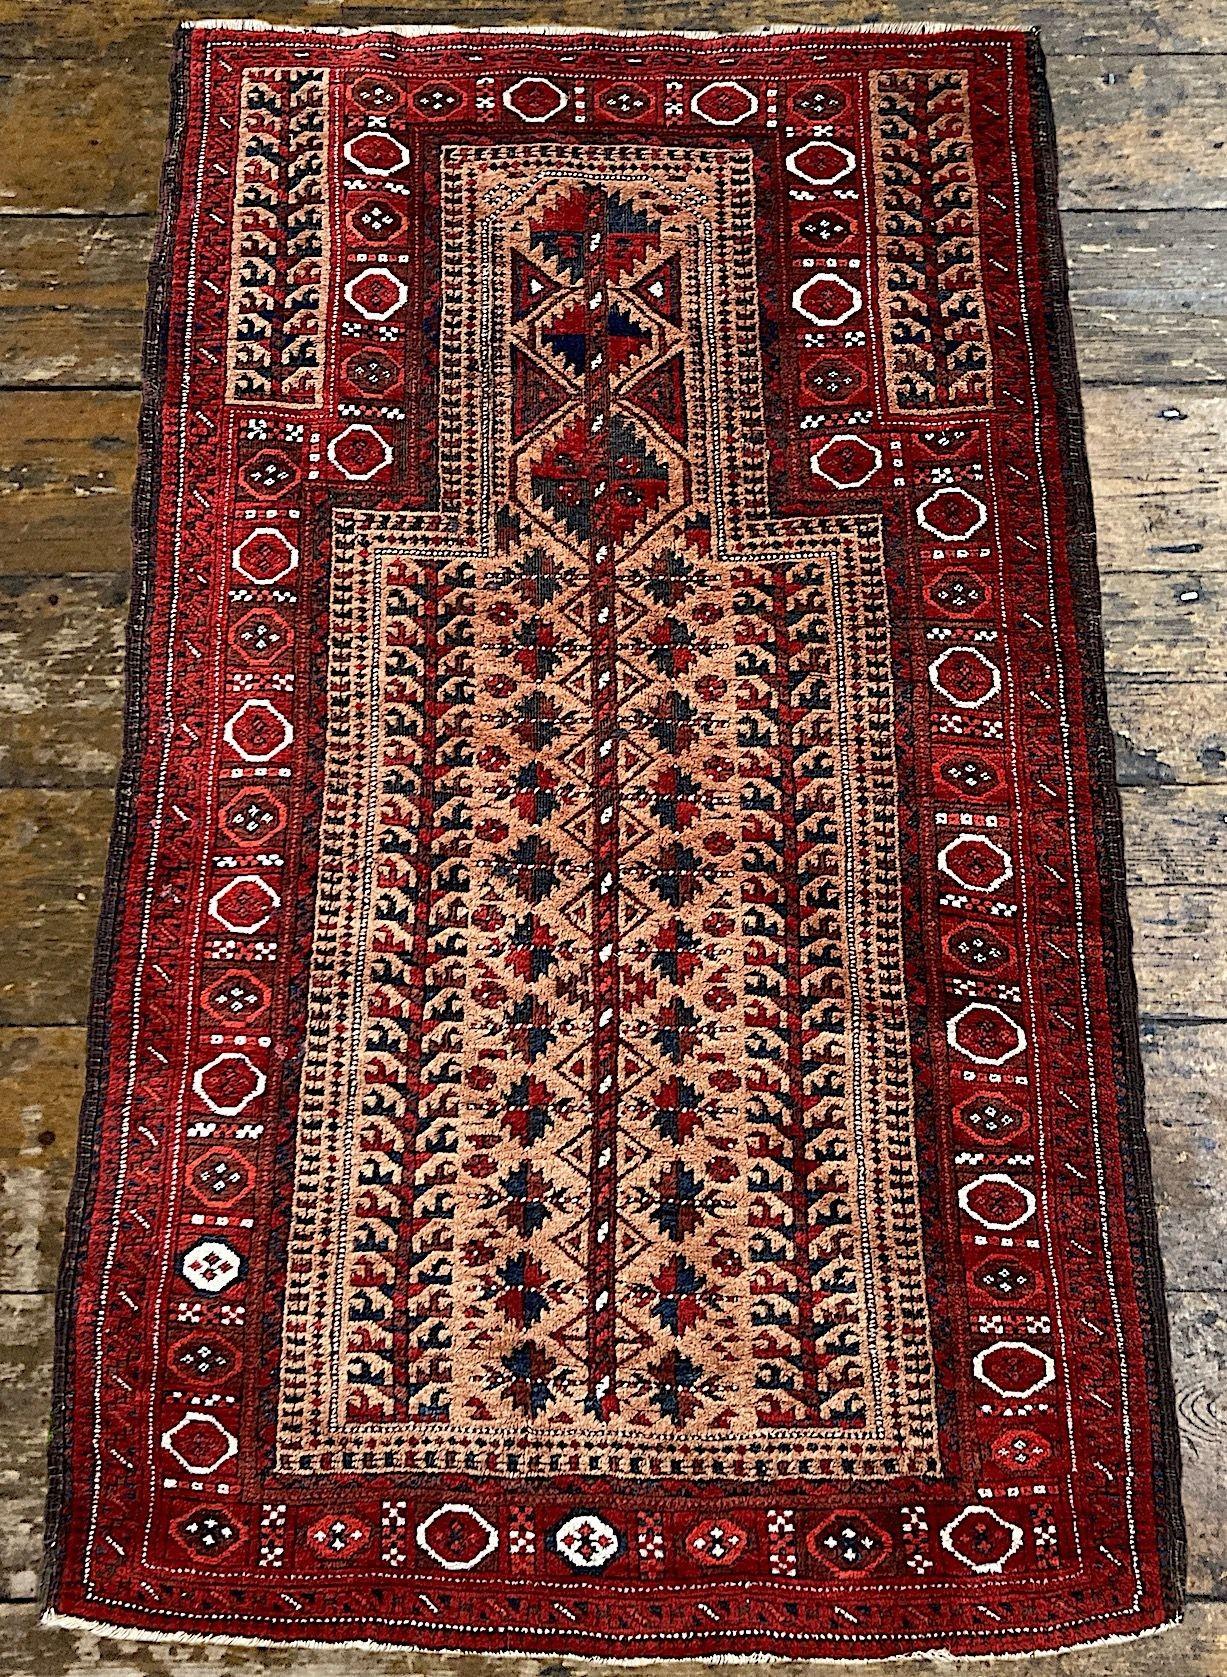 Early 20th Century Antique Belouch Rug 1.76m x 0.89m For Sale